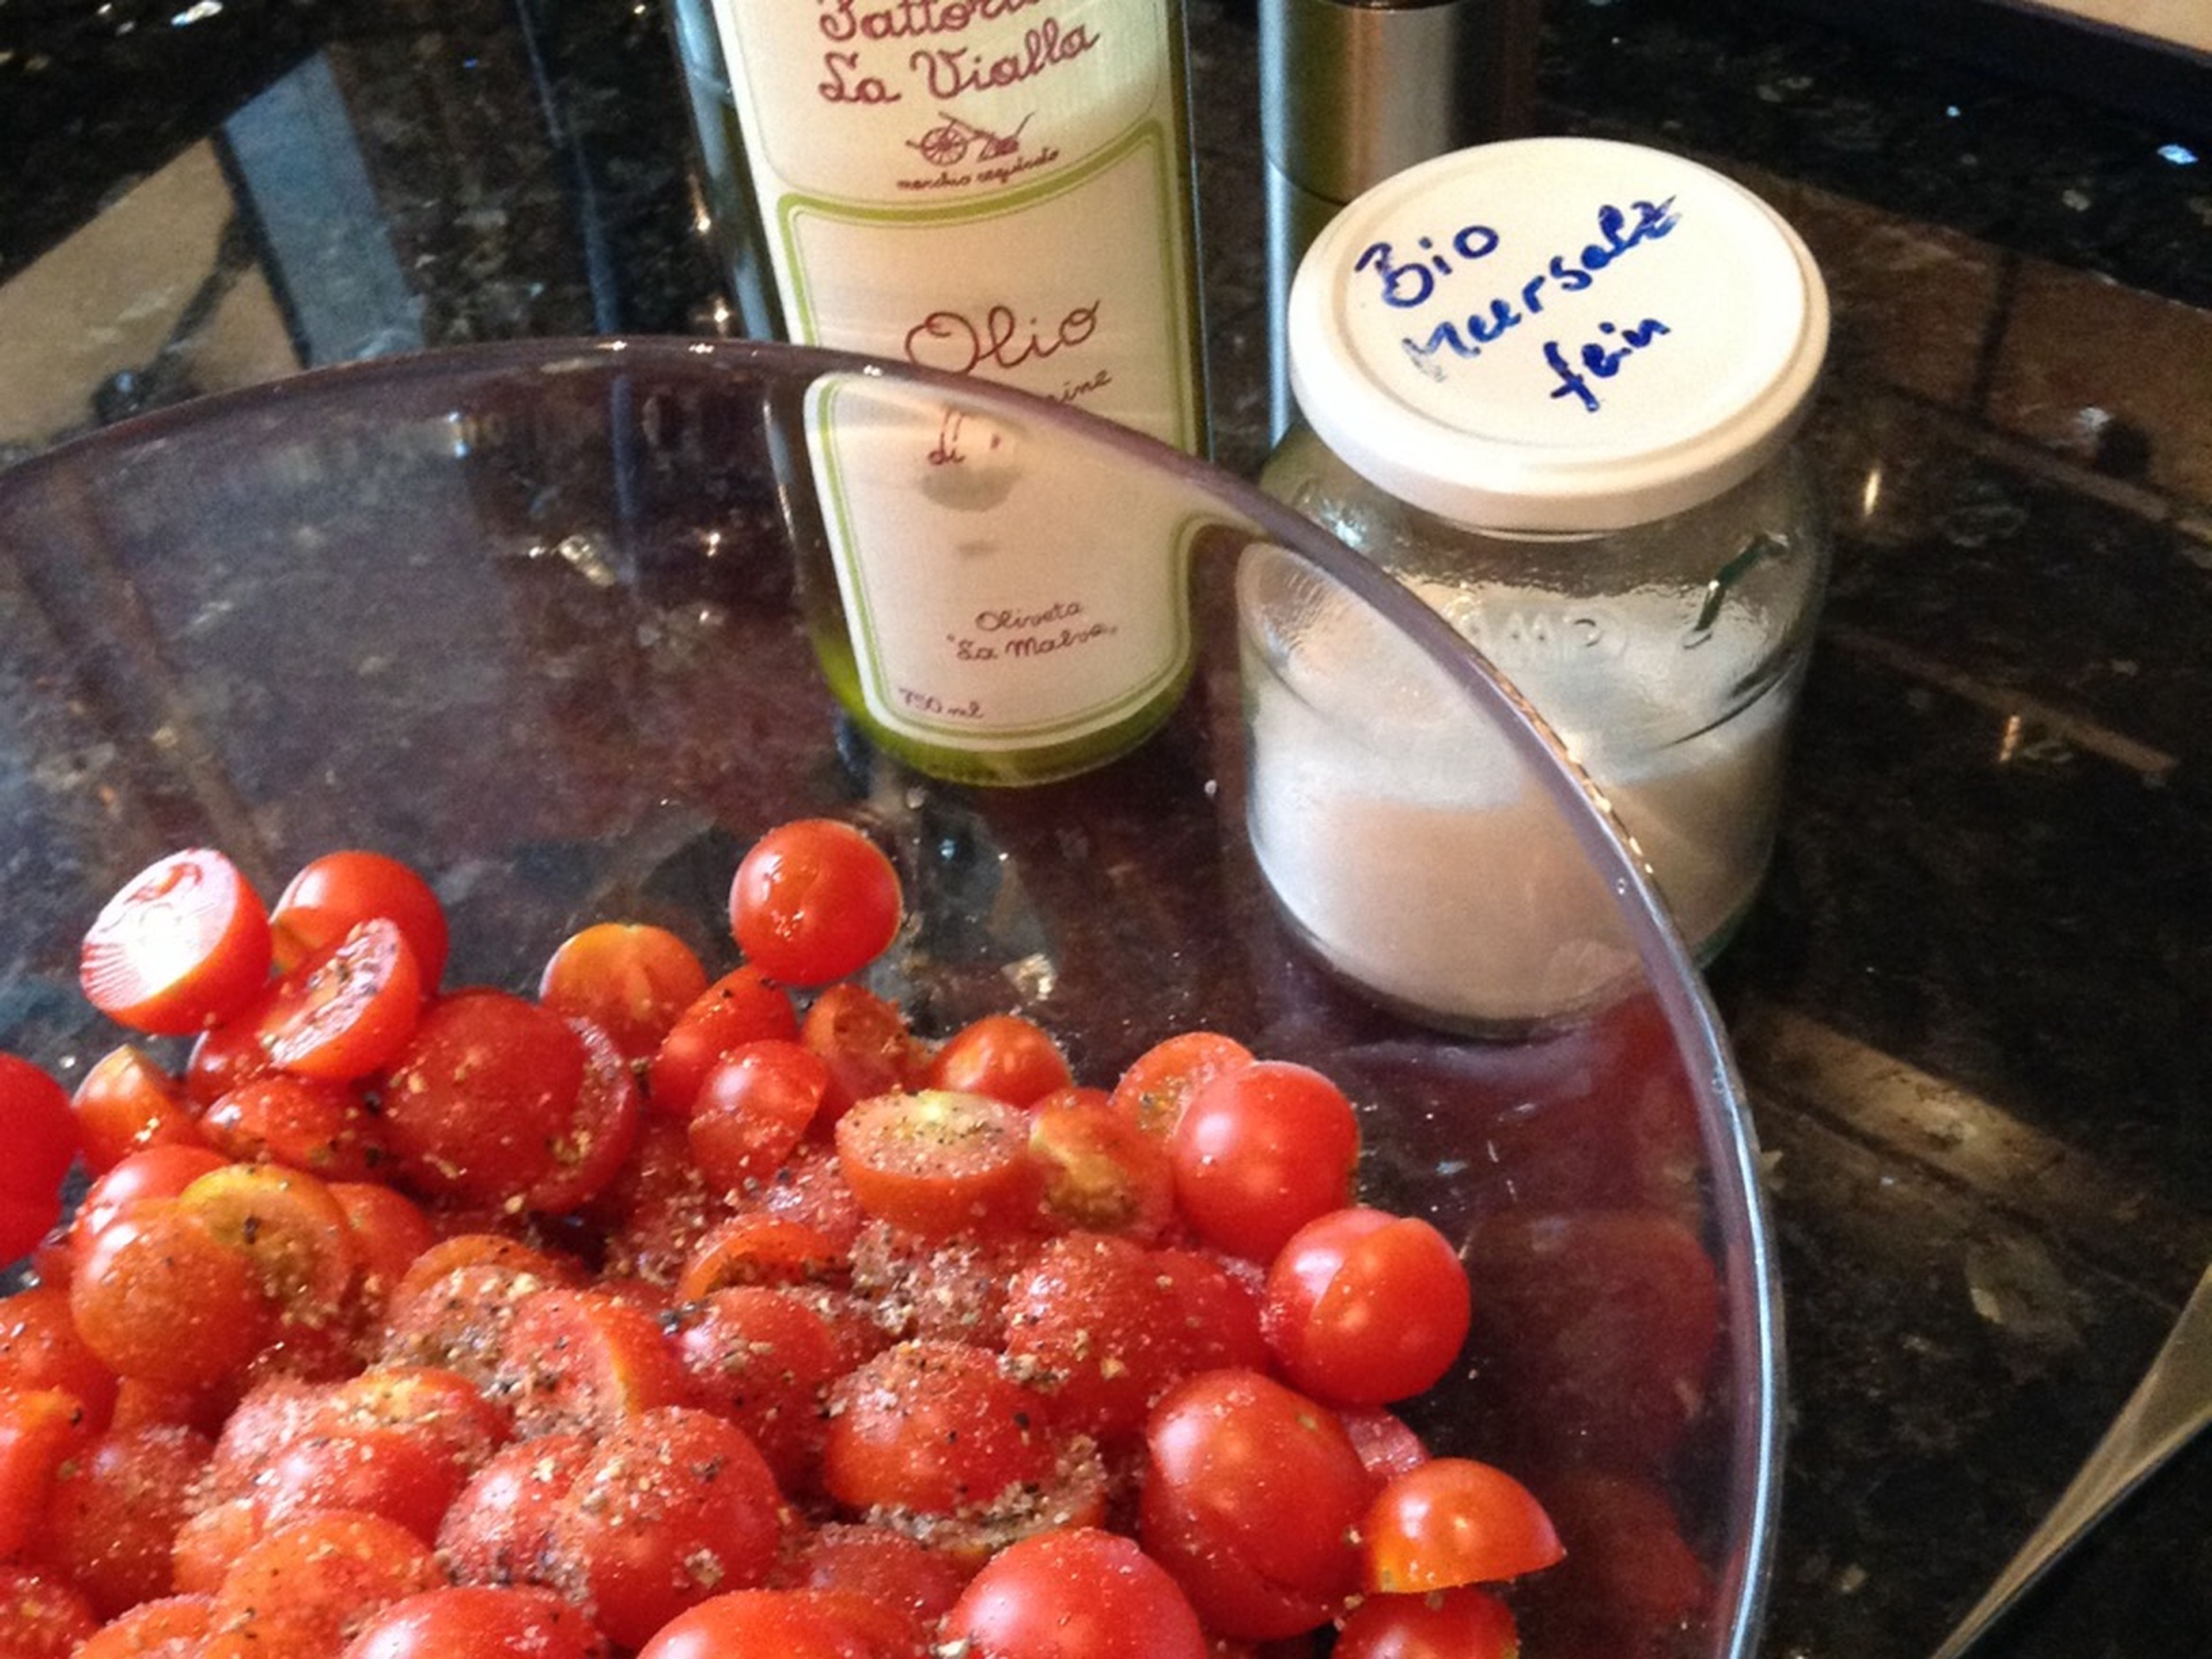 Transfer tomatoes to a bowl, add olive oil, and season with salt and pepper. Stir well to combine.